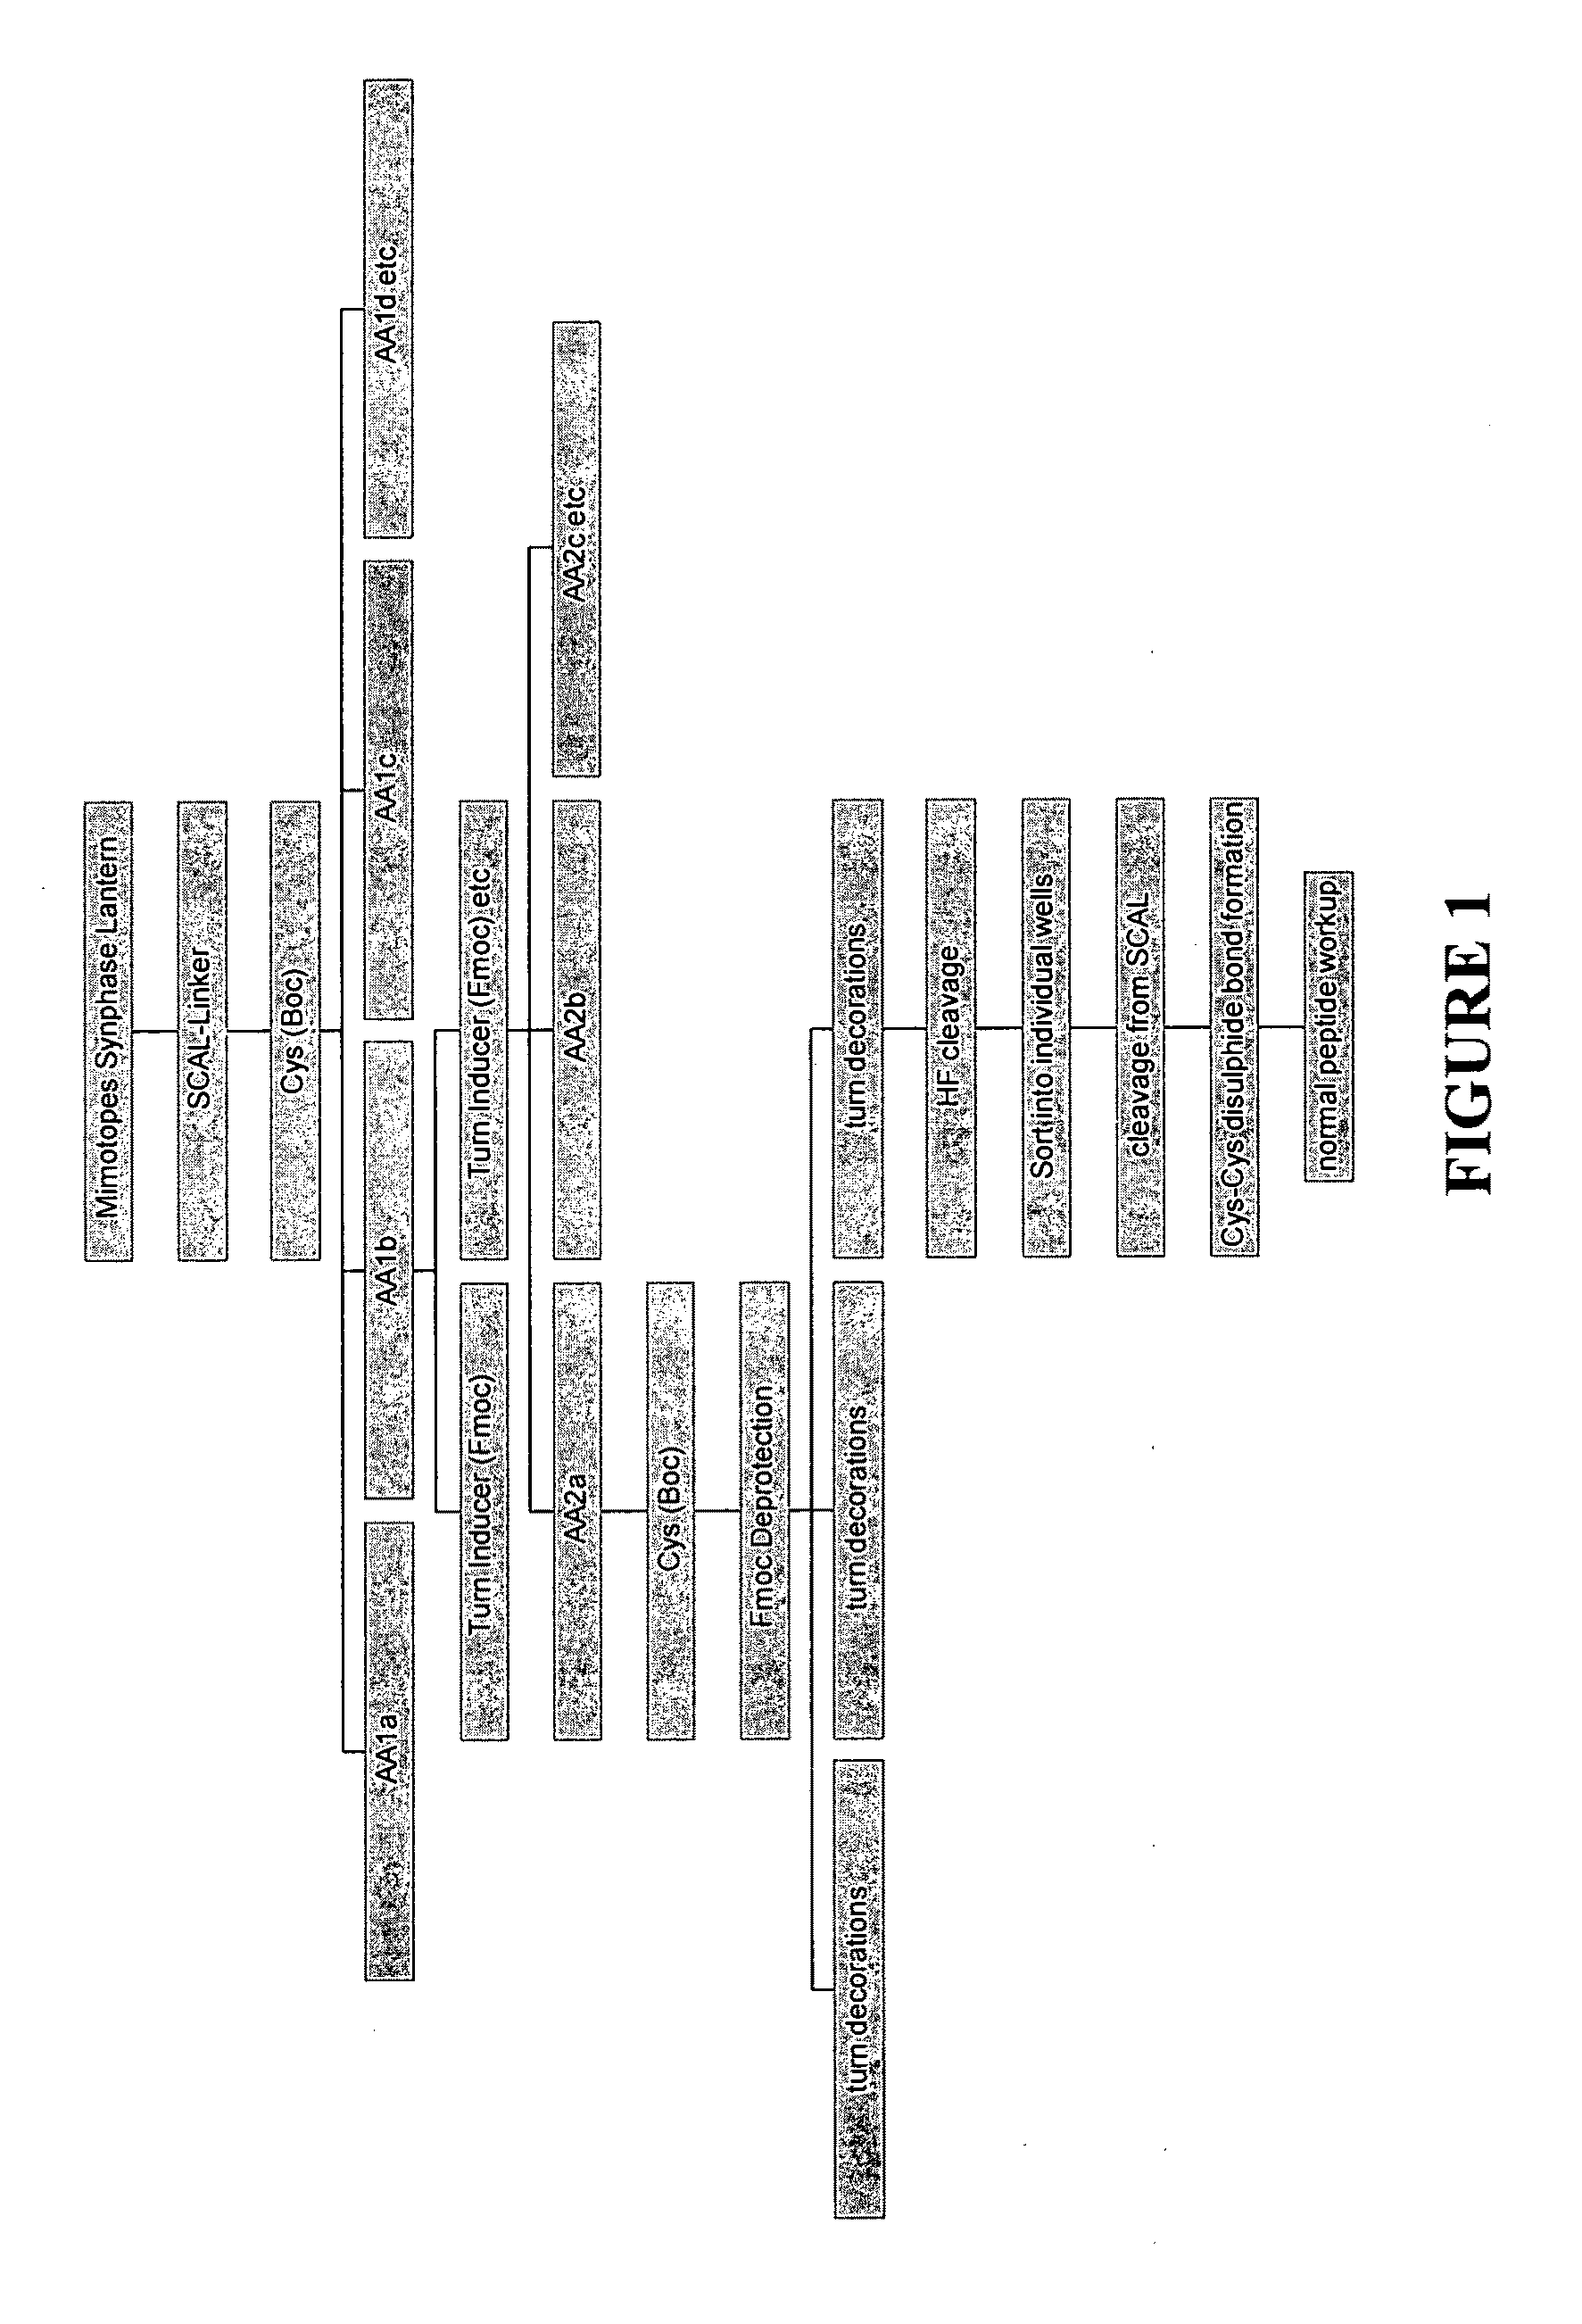 Libraries of peptide conjugates and methods for making them